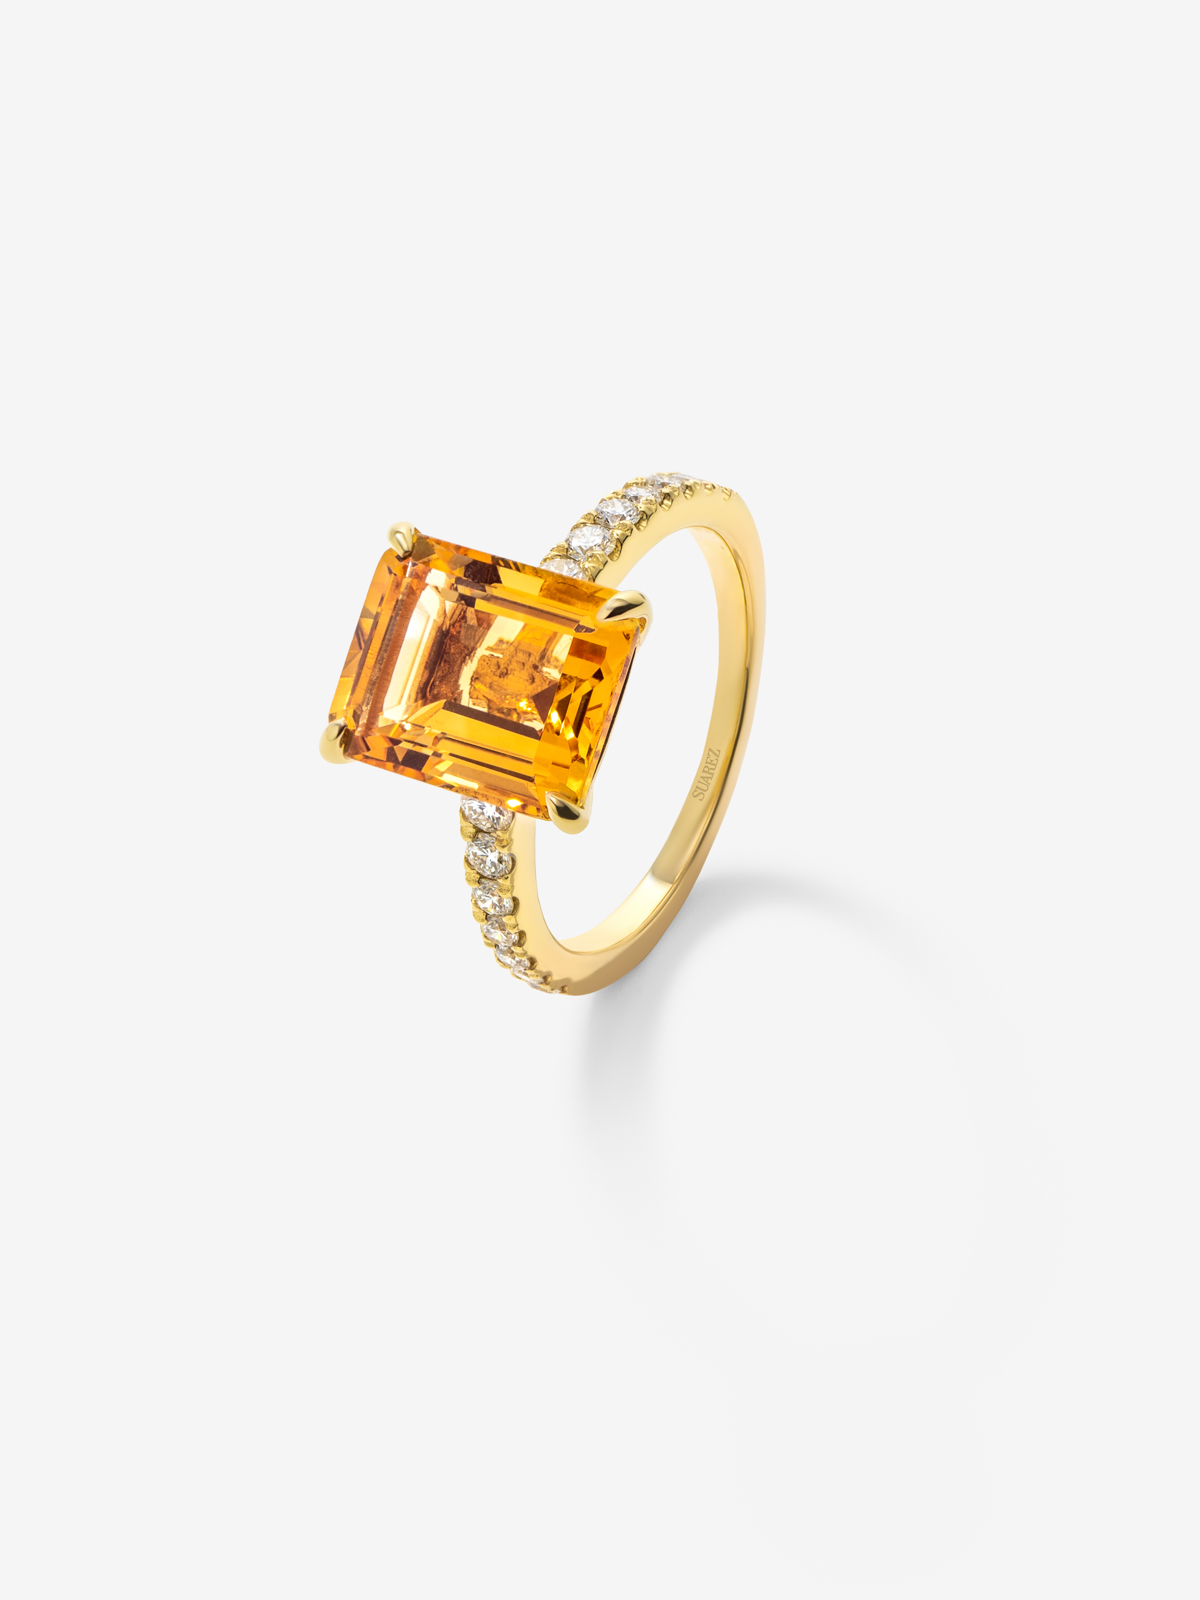 18K yellow gold ring with citrine quartz in emerald size of 3.7 cts and white diamonds in bright size of 0.32 cts